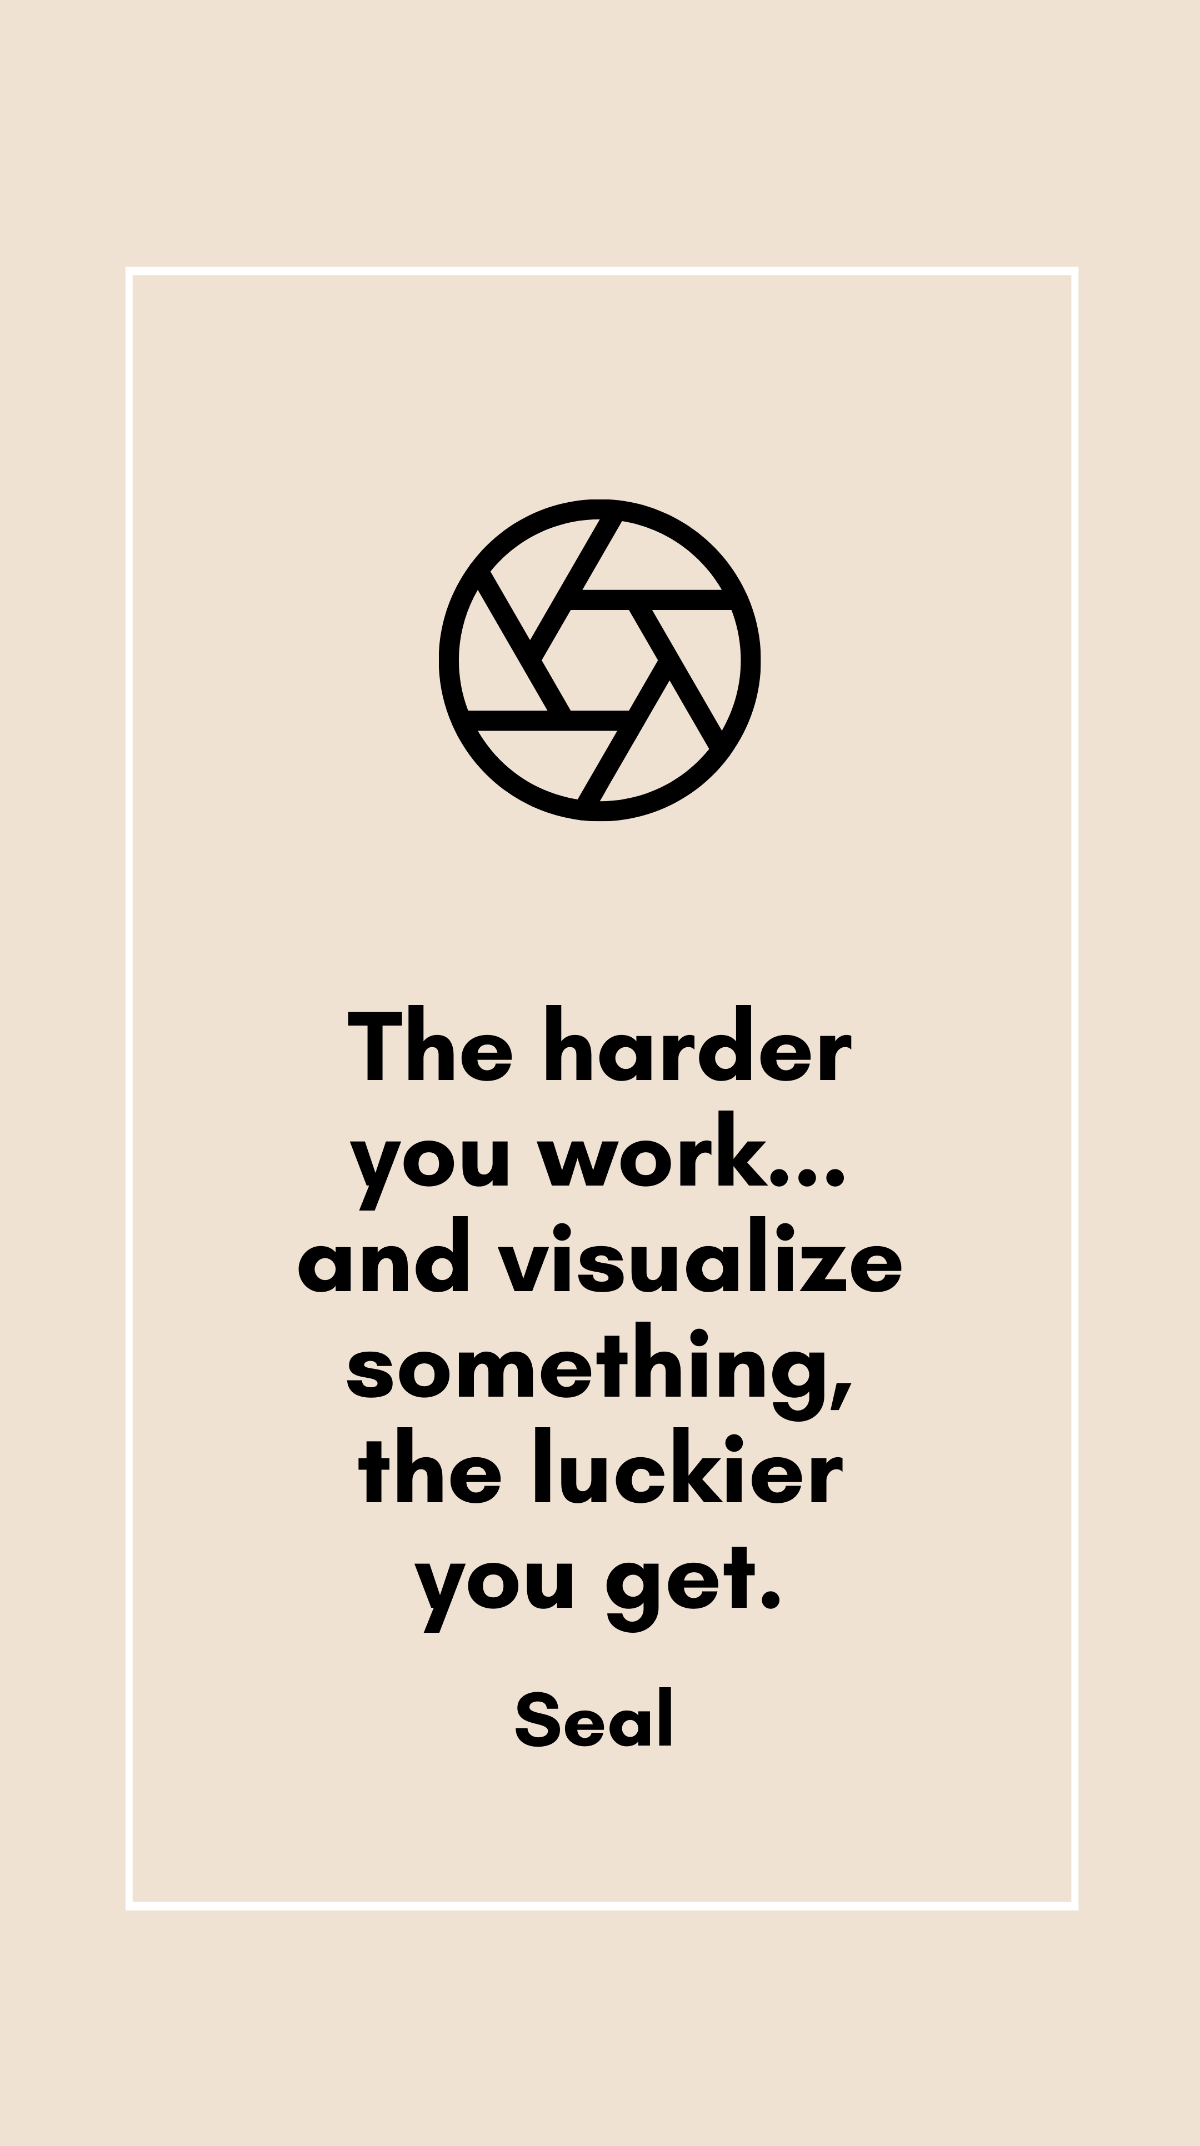 Seal - The harder you work... and visualize something, the luckier you get.